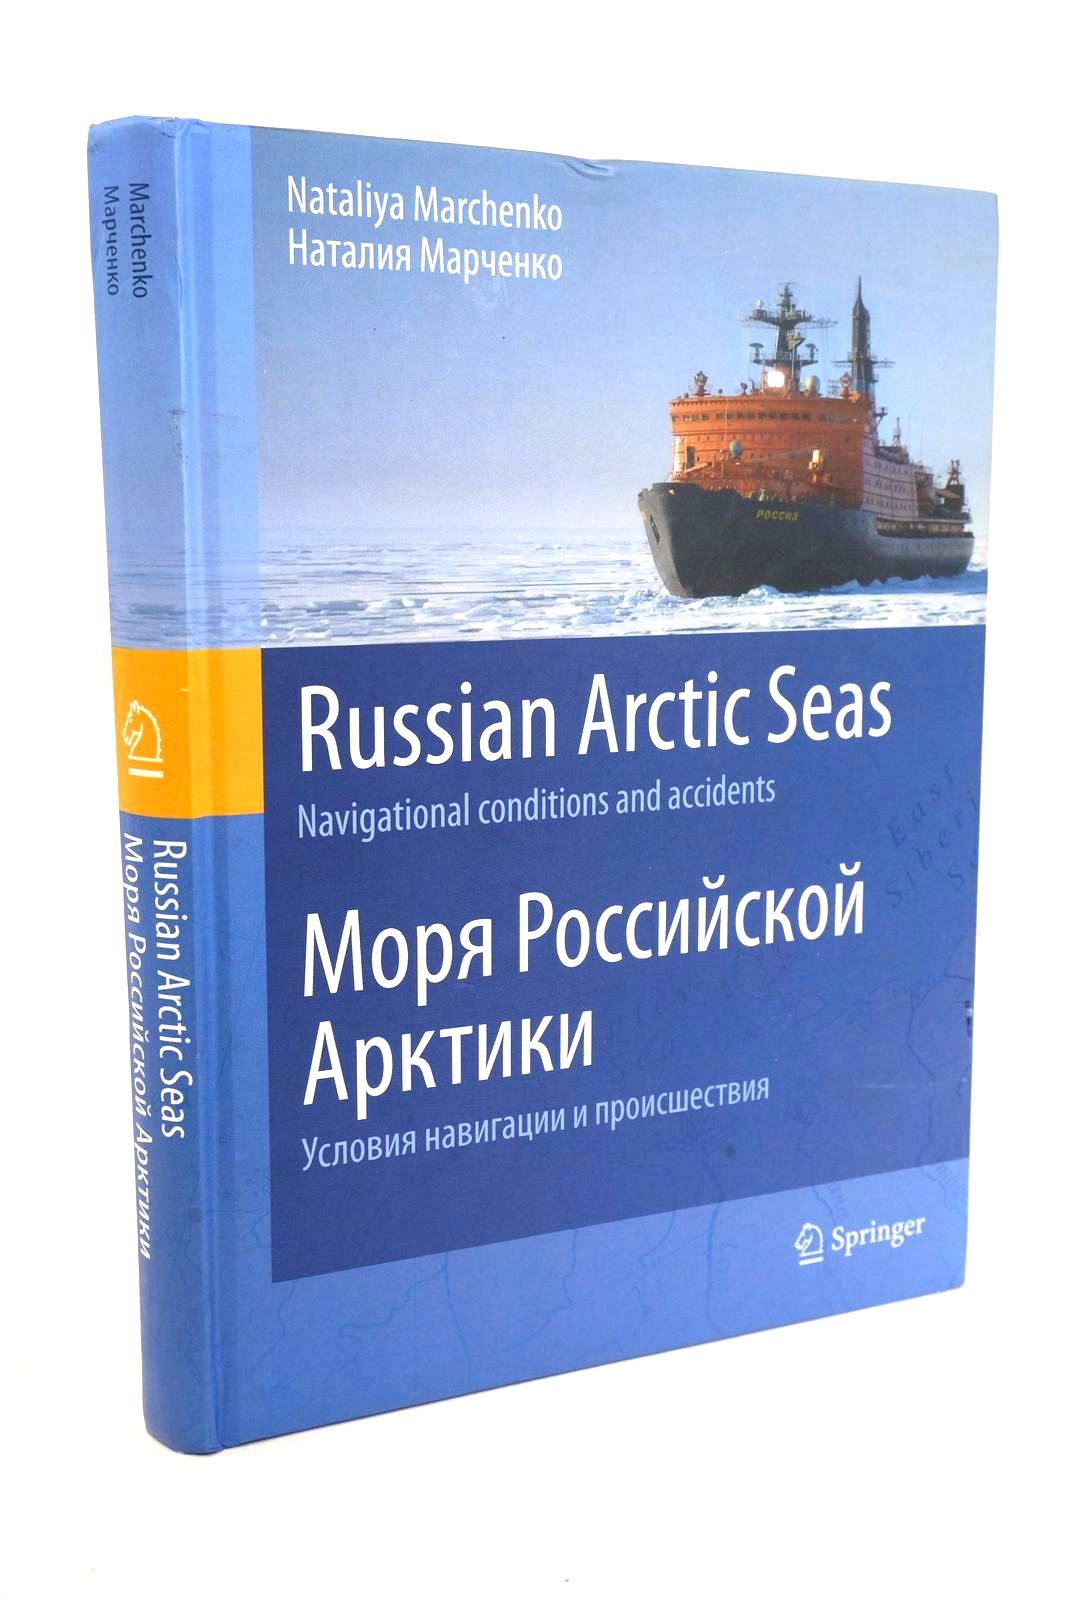 Photo of RUSSIAN ARCTIC SEAS NAVIGATIONAL CONDITIONS AND ACCIDENTS written by Marchenko, Nataliya published by Springer-Verlag (STOCK CODE: 1327286)  for sale by Stella & Rose's Books